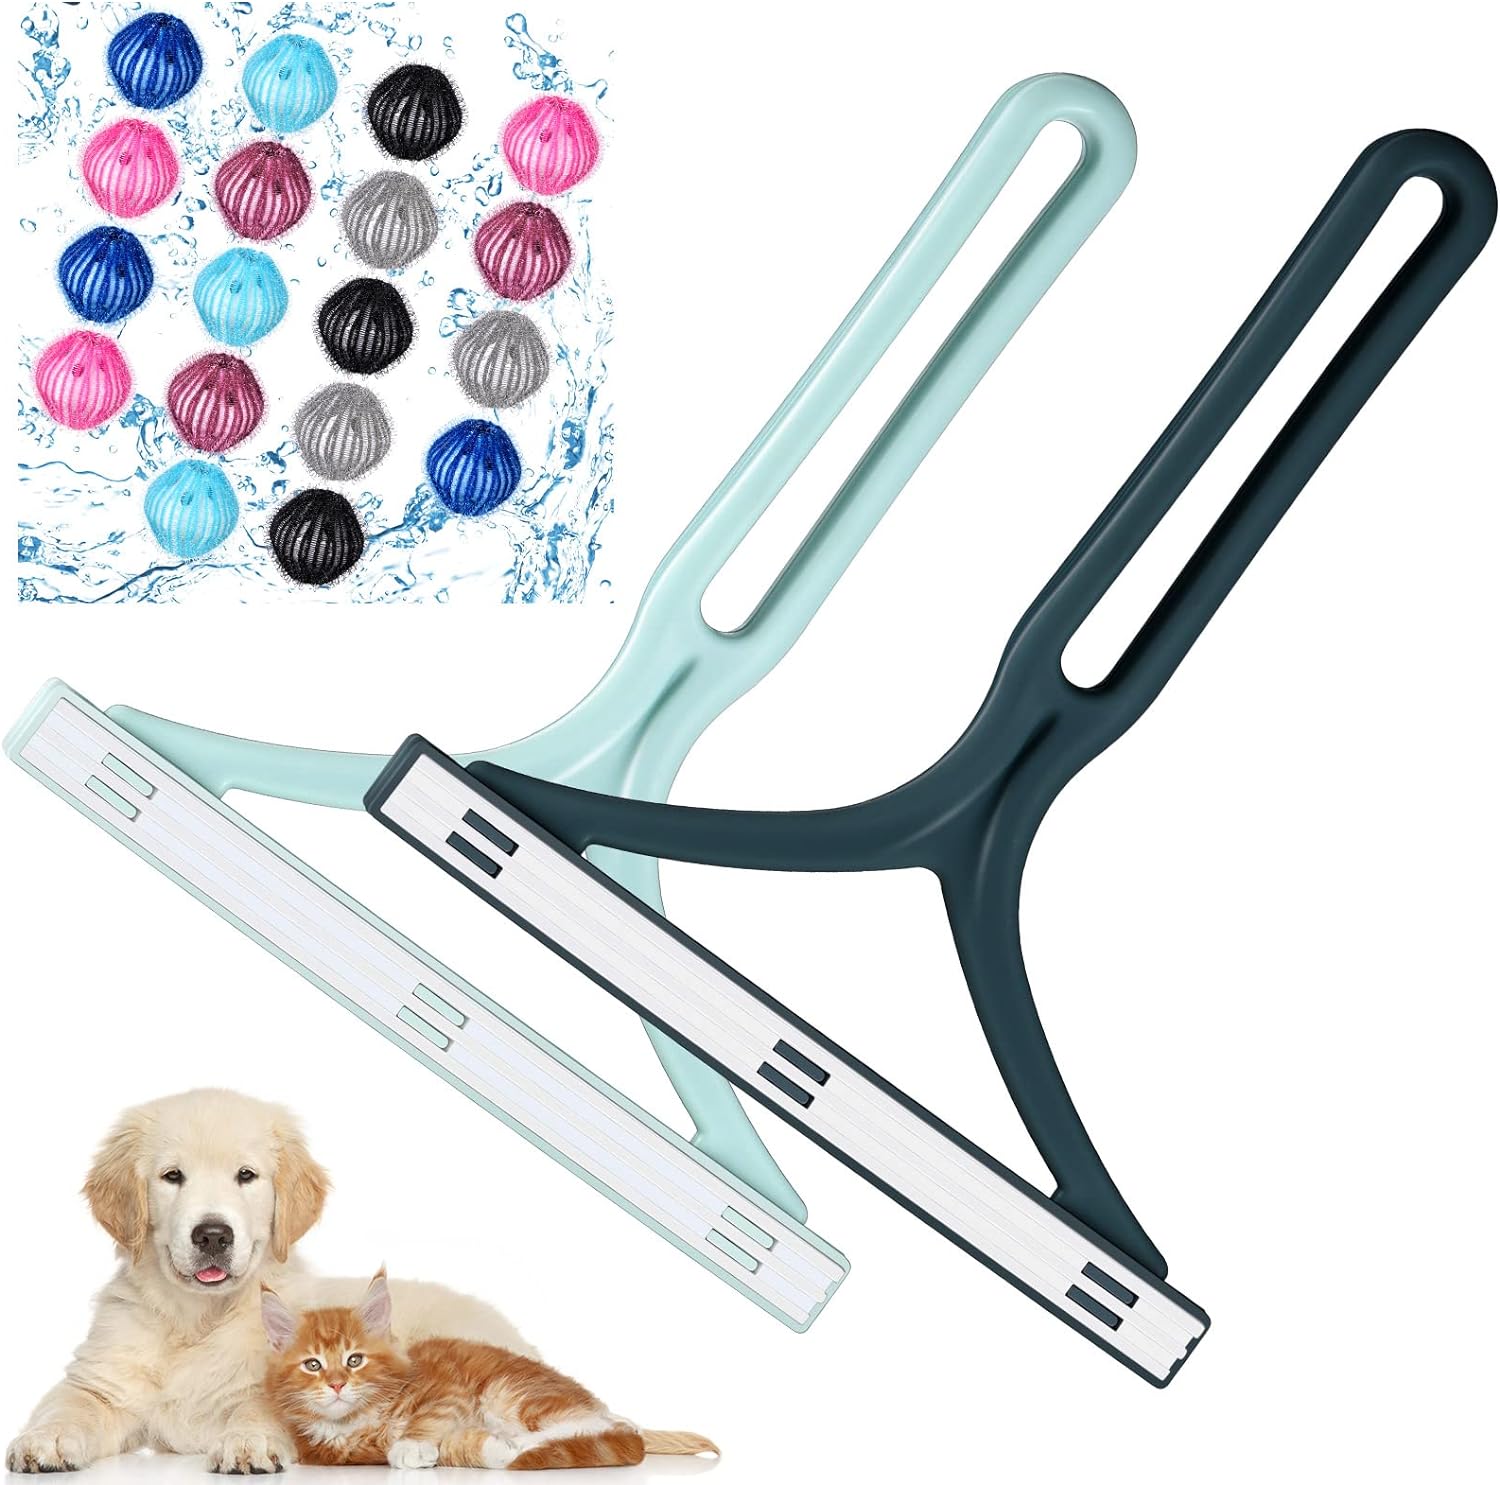 20 Pcs Pet Hair Remover, Cat Dog Fur Remover Portable Lint Removal Tool, Clothes Fuzz Rollers Hairball Shaver Brush